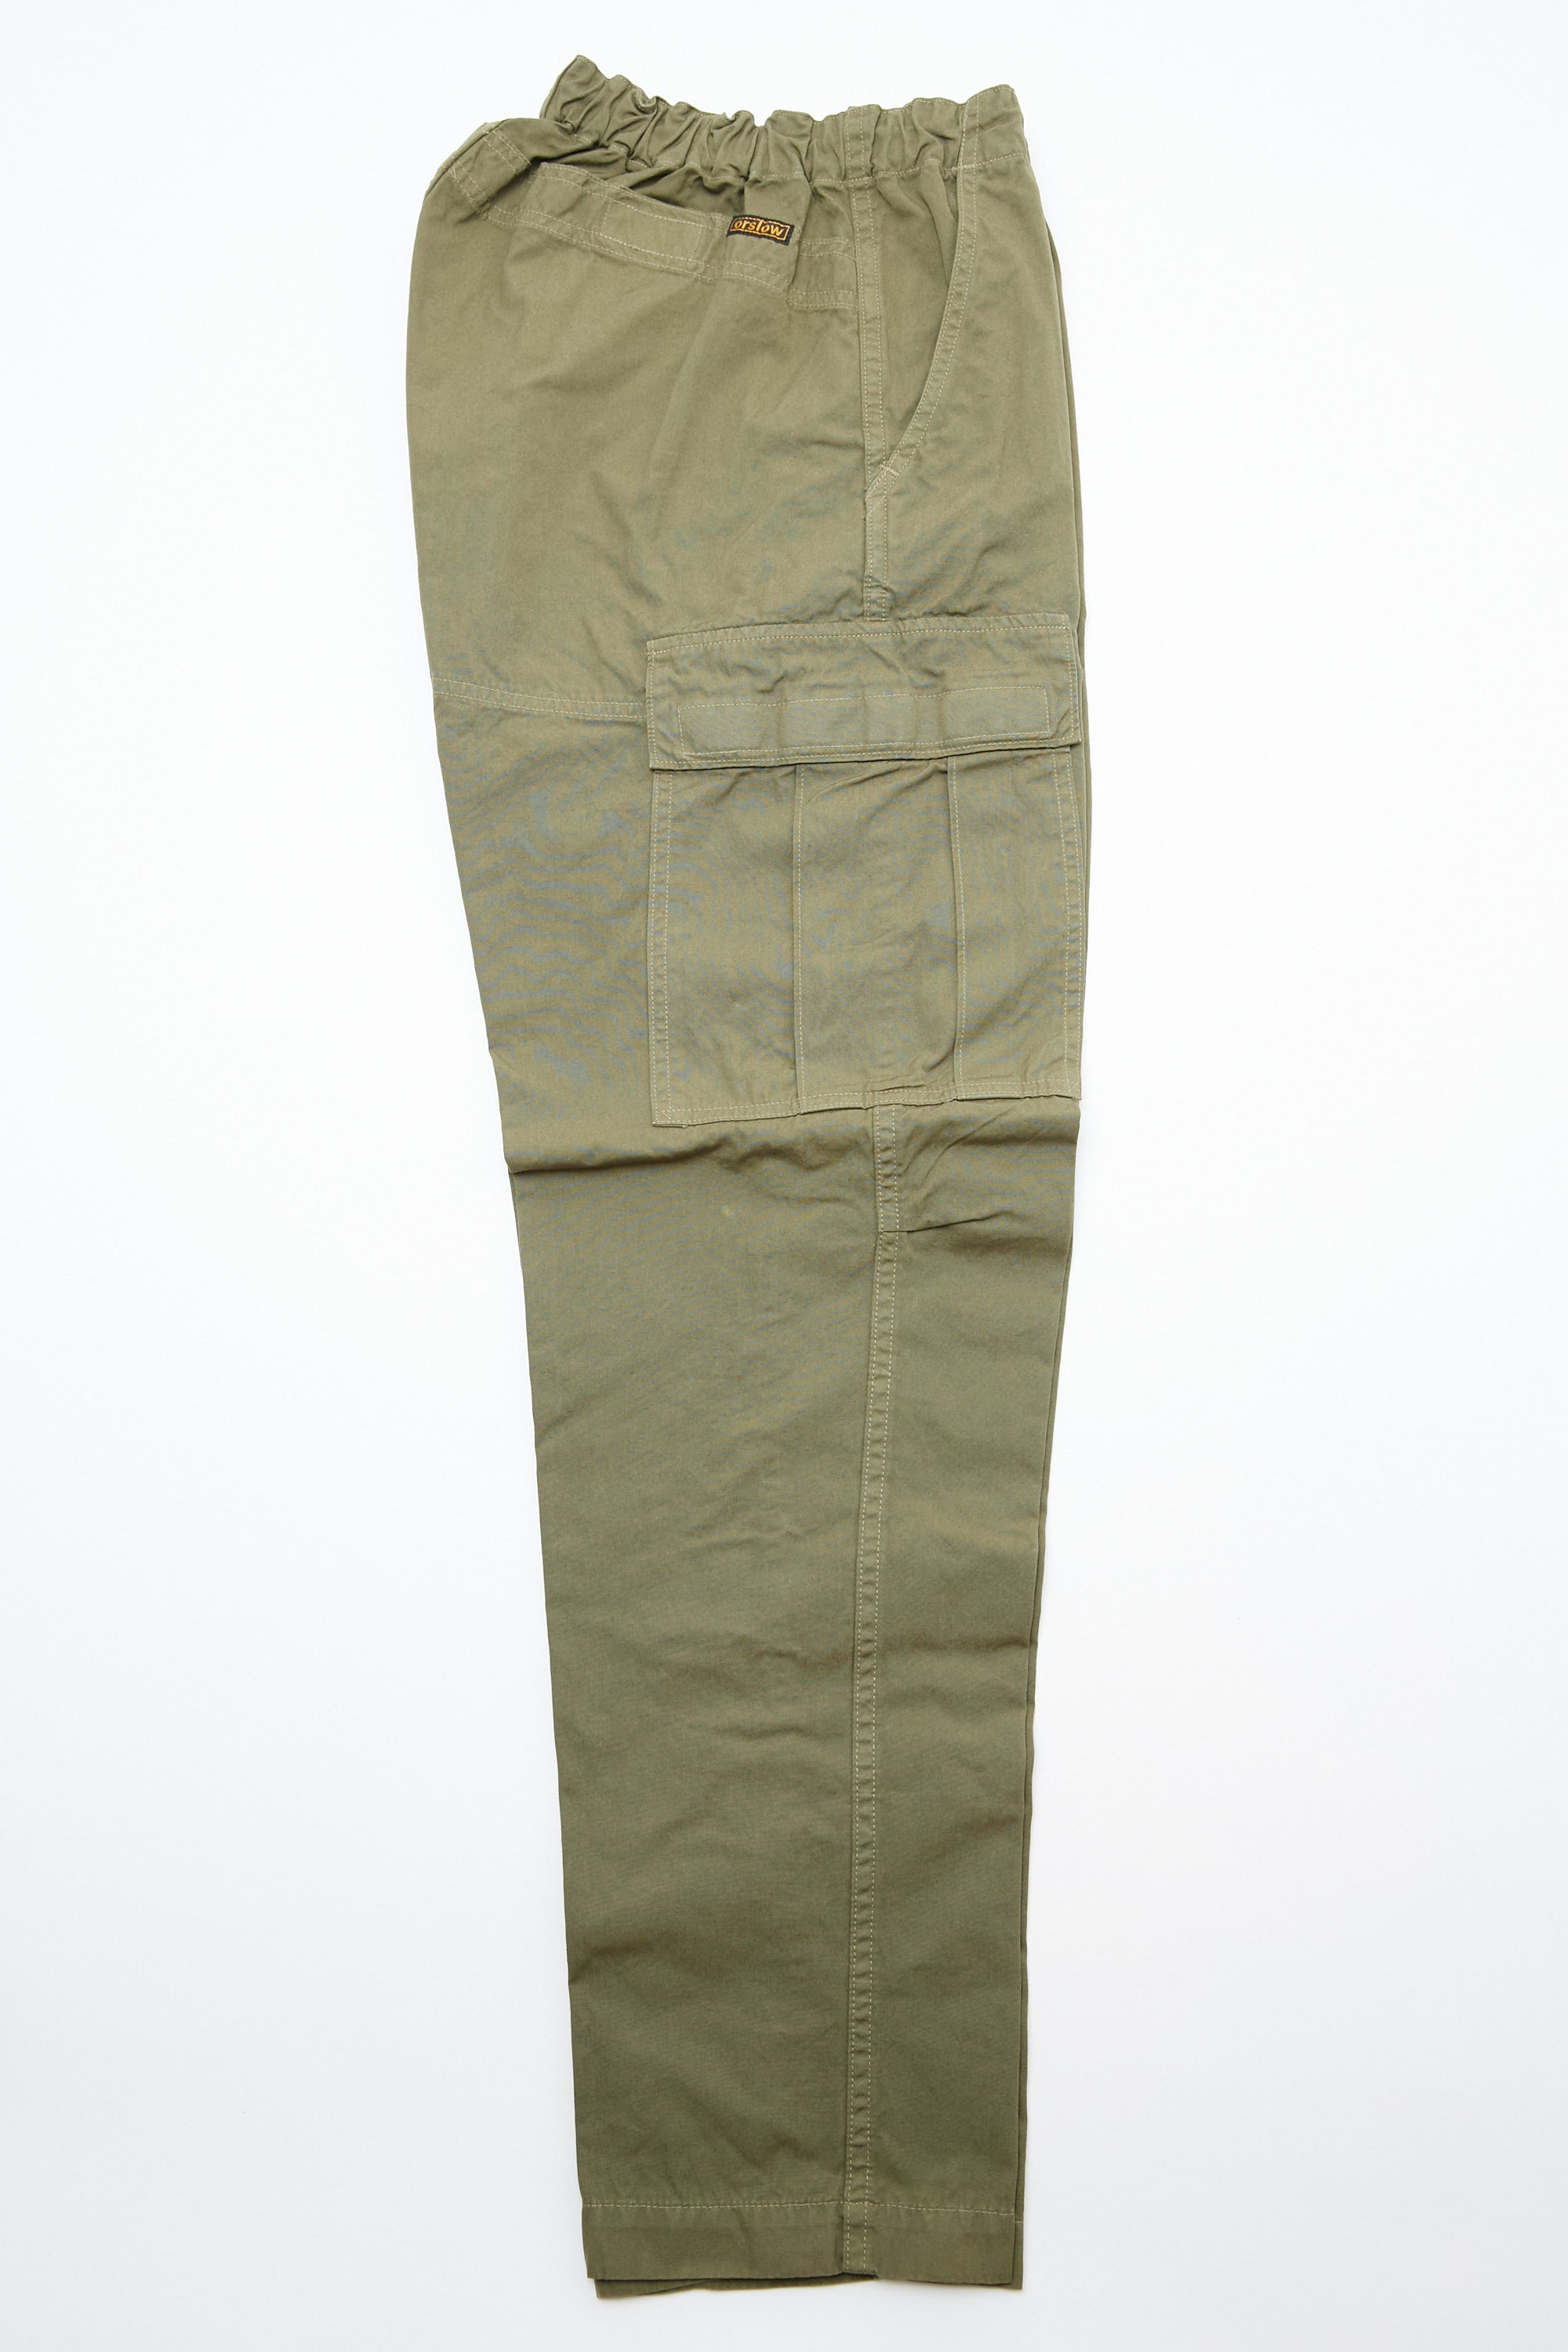 orSlow Easy Cargo Pants - Army Green